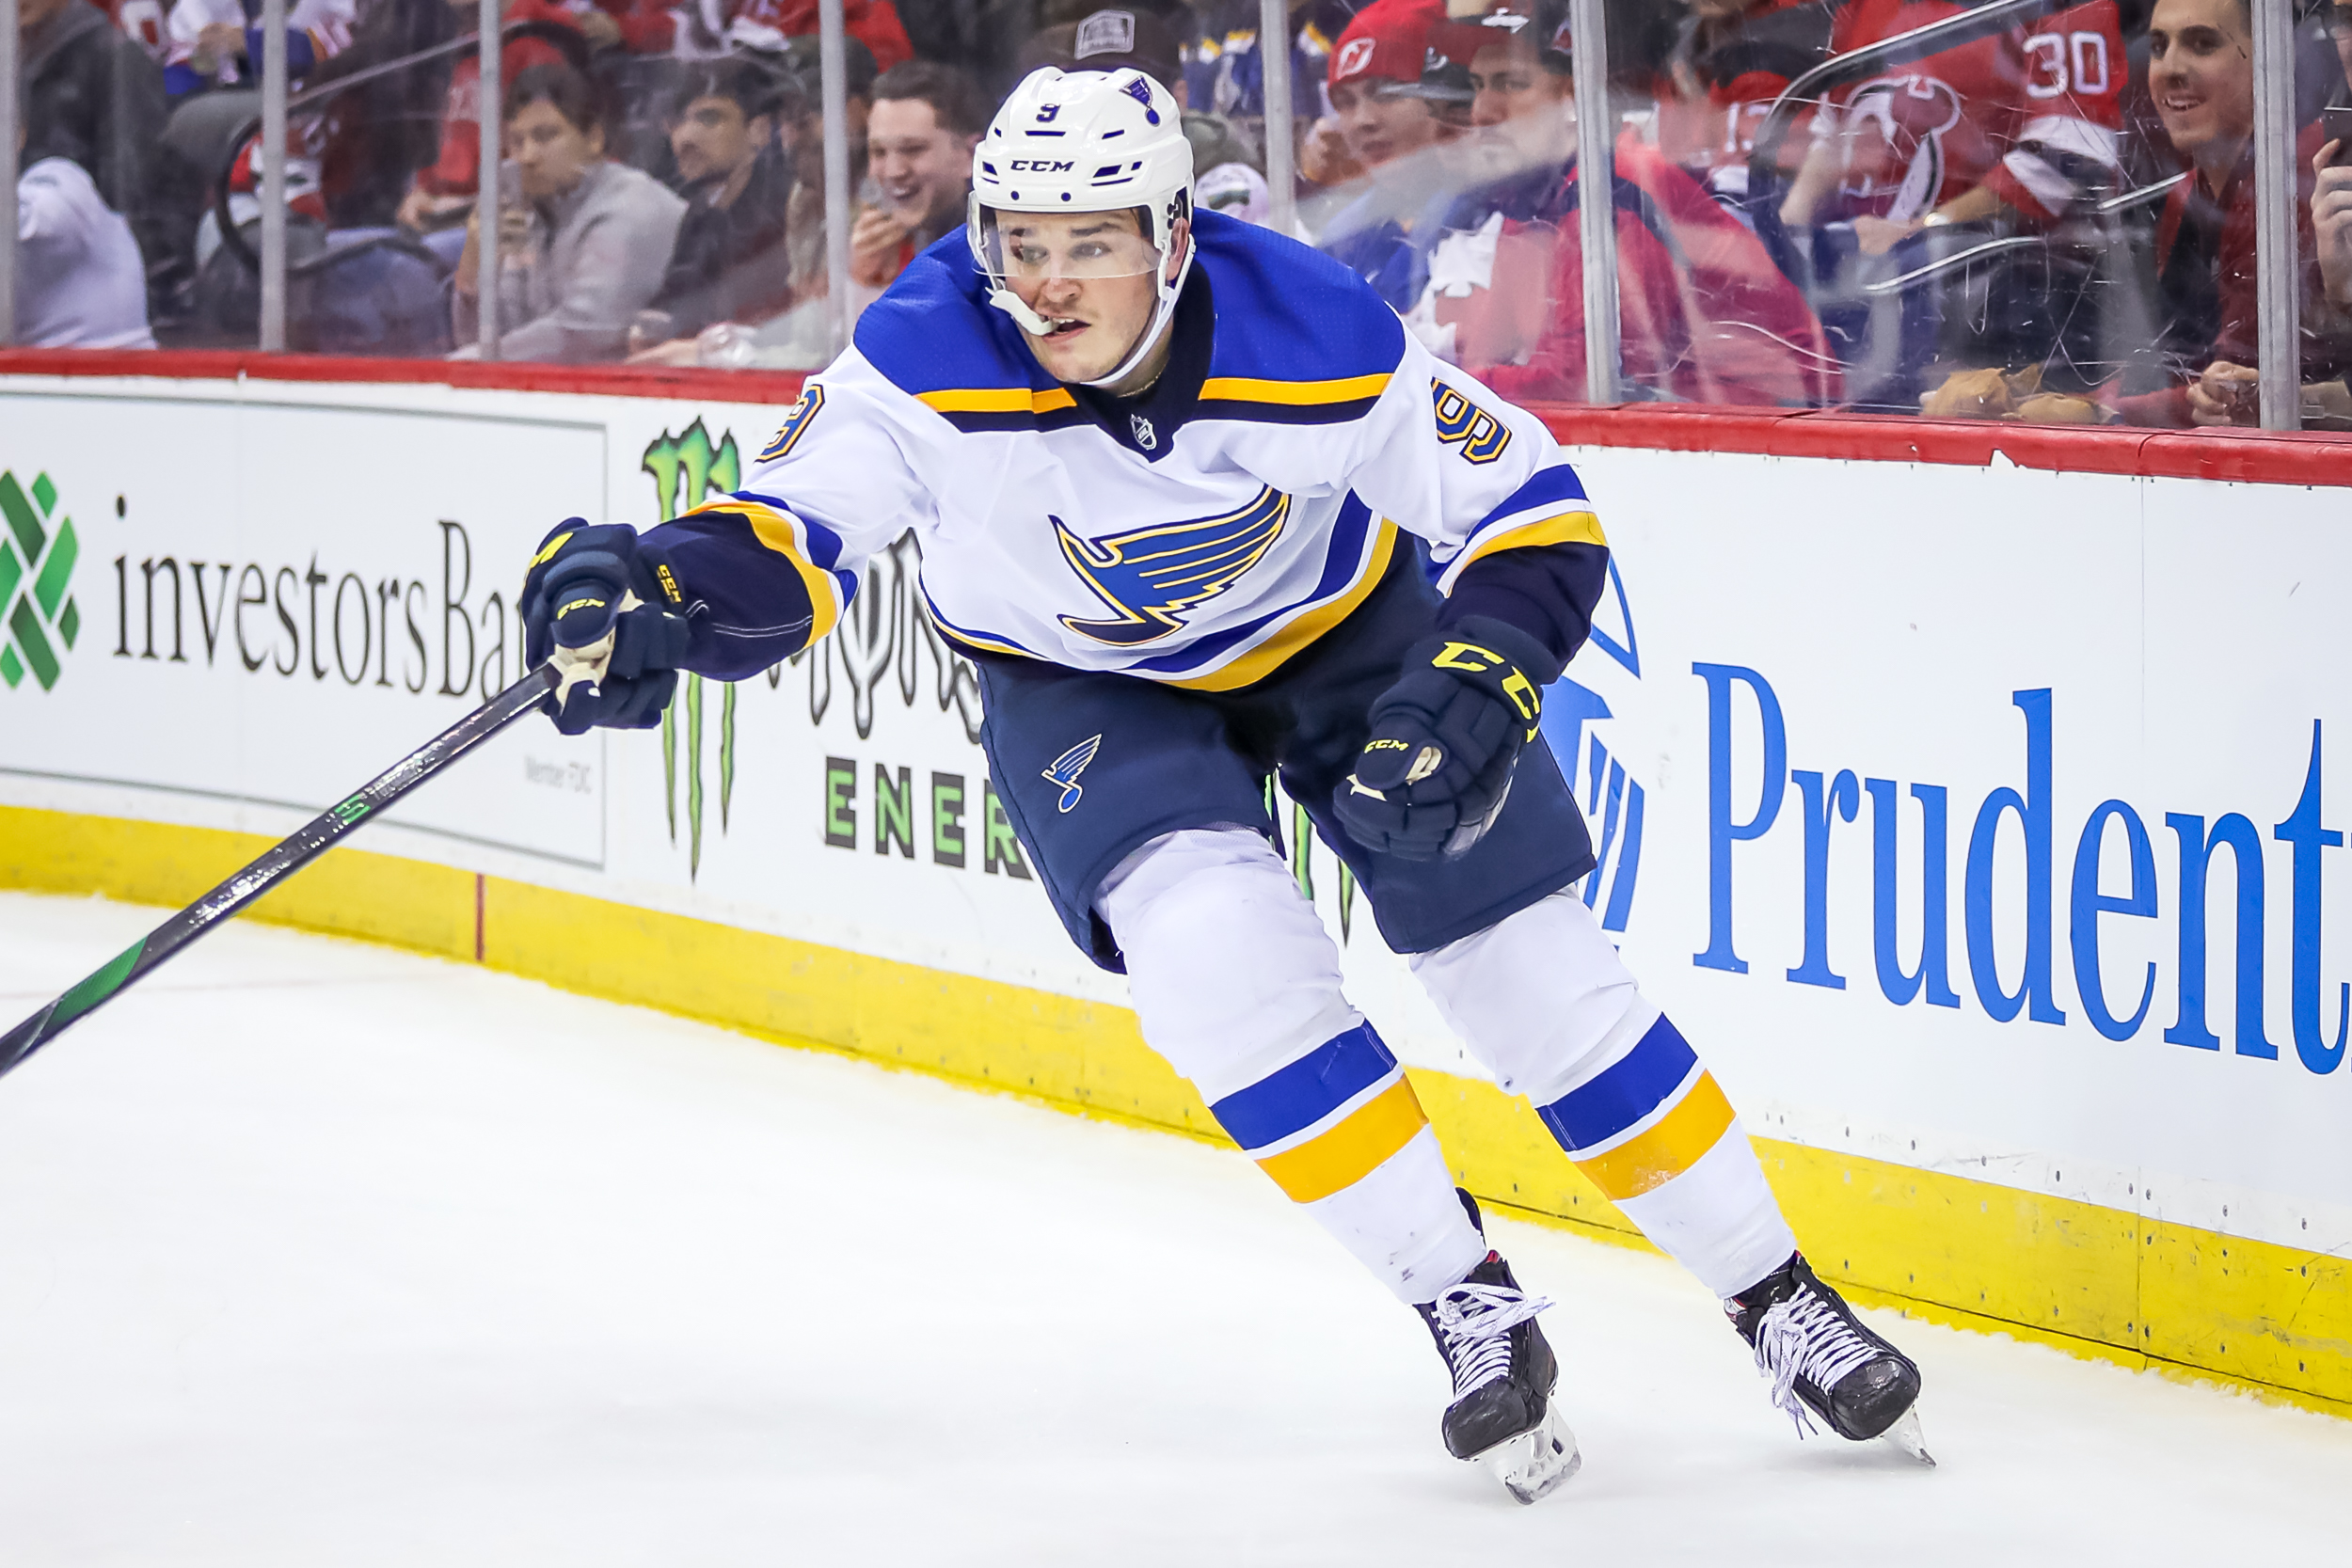 St. Louis Blues: Sammy Blais Playing His Way Into Top-6 Role